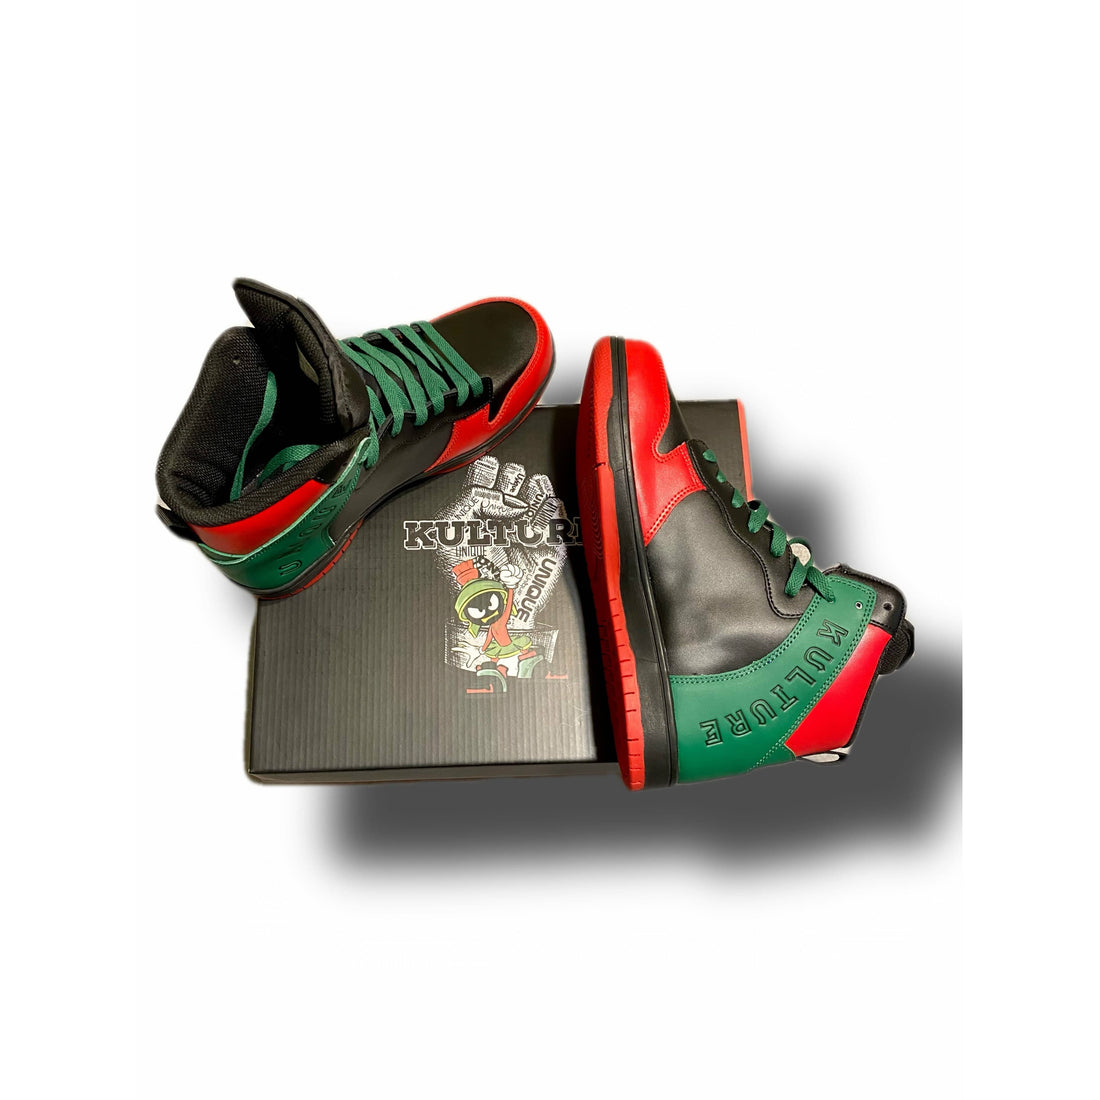 martians unique kulture limited edition red black green sneakers mid top l leather  pattern  designer shoes marvin the martian 